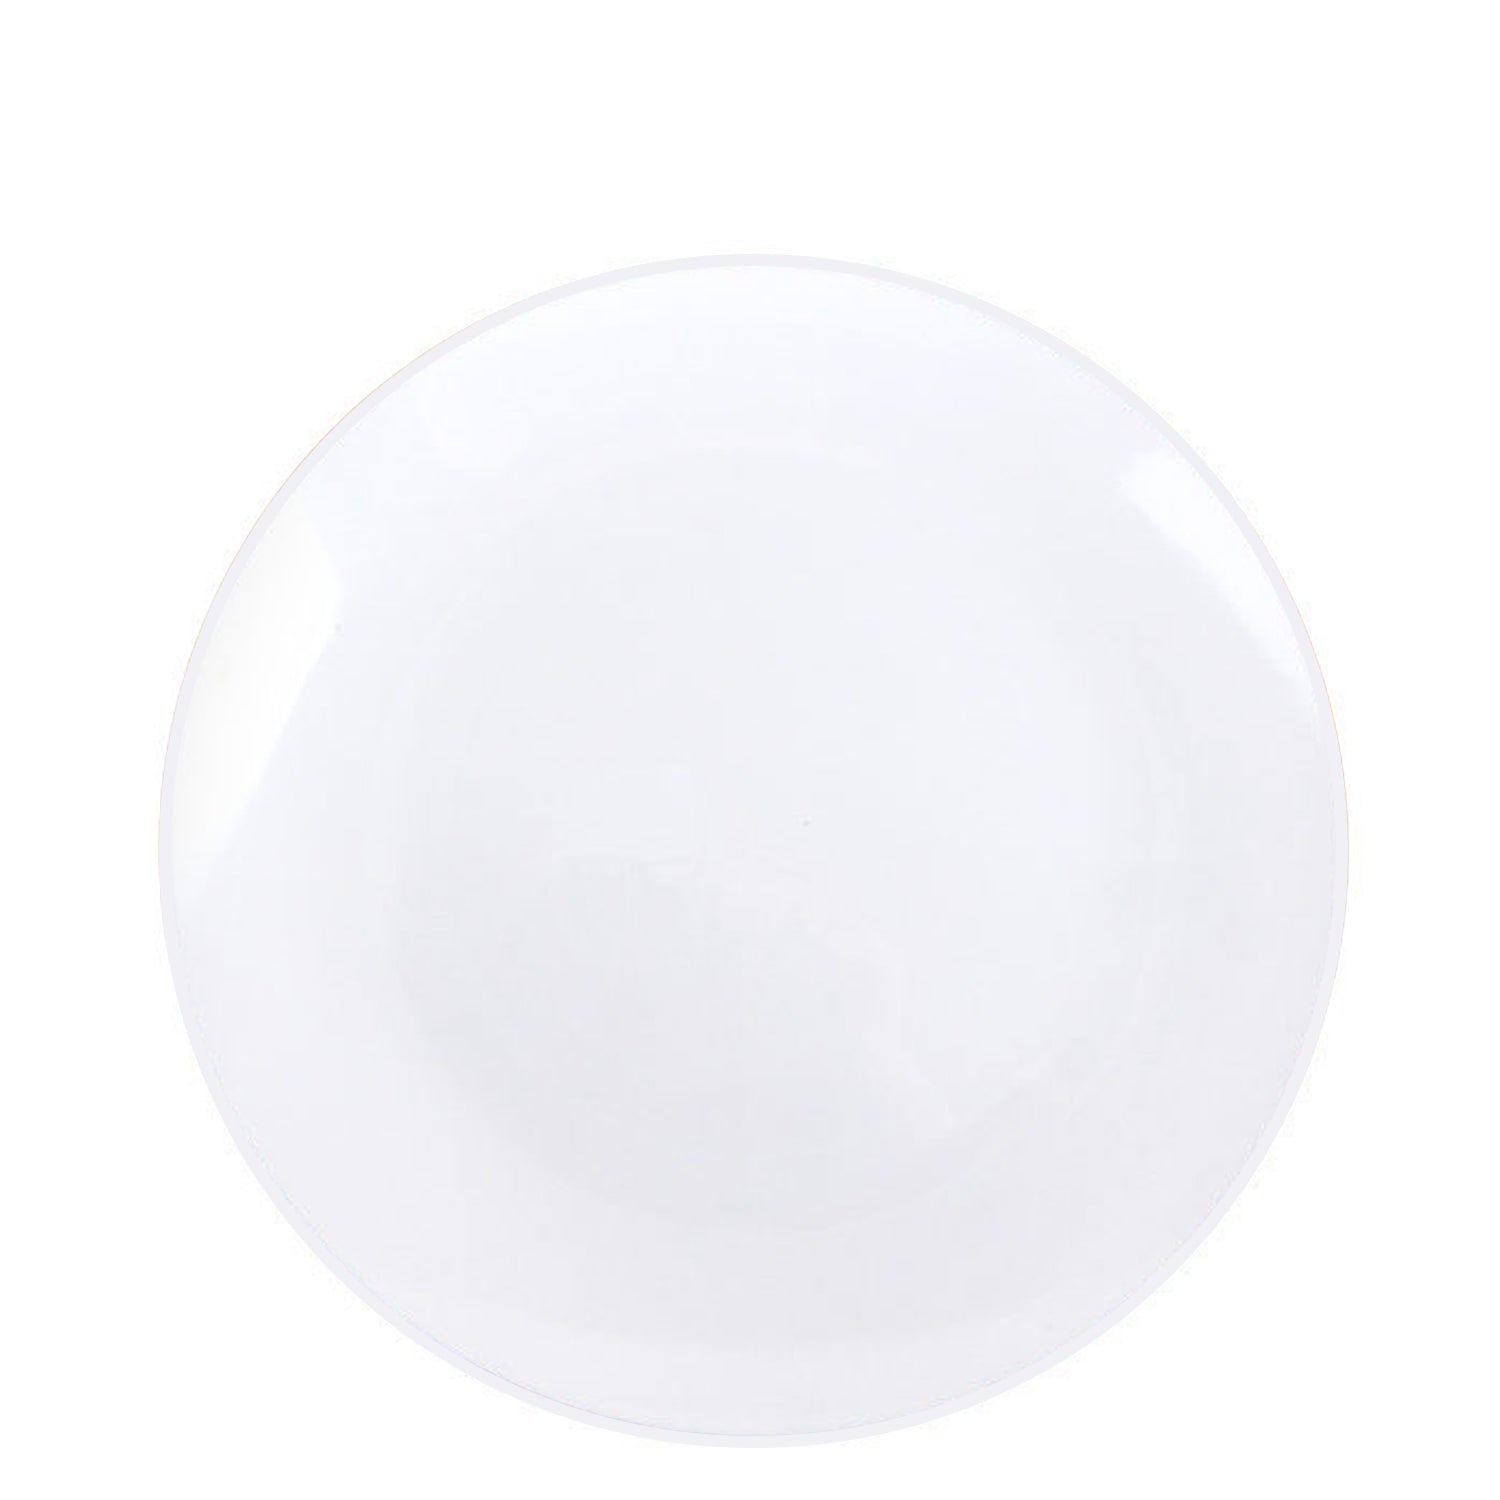 Organic Collection White Salad Plates 7.5" Bowls Blue Sky 10 Pieces  